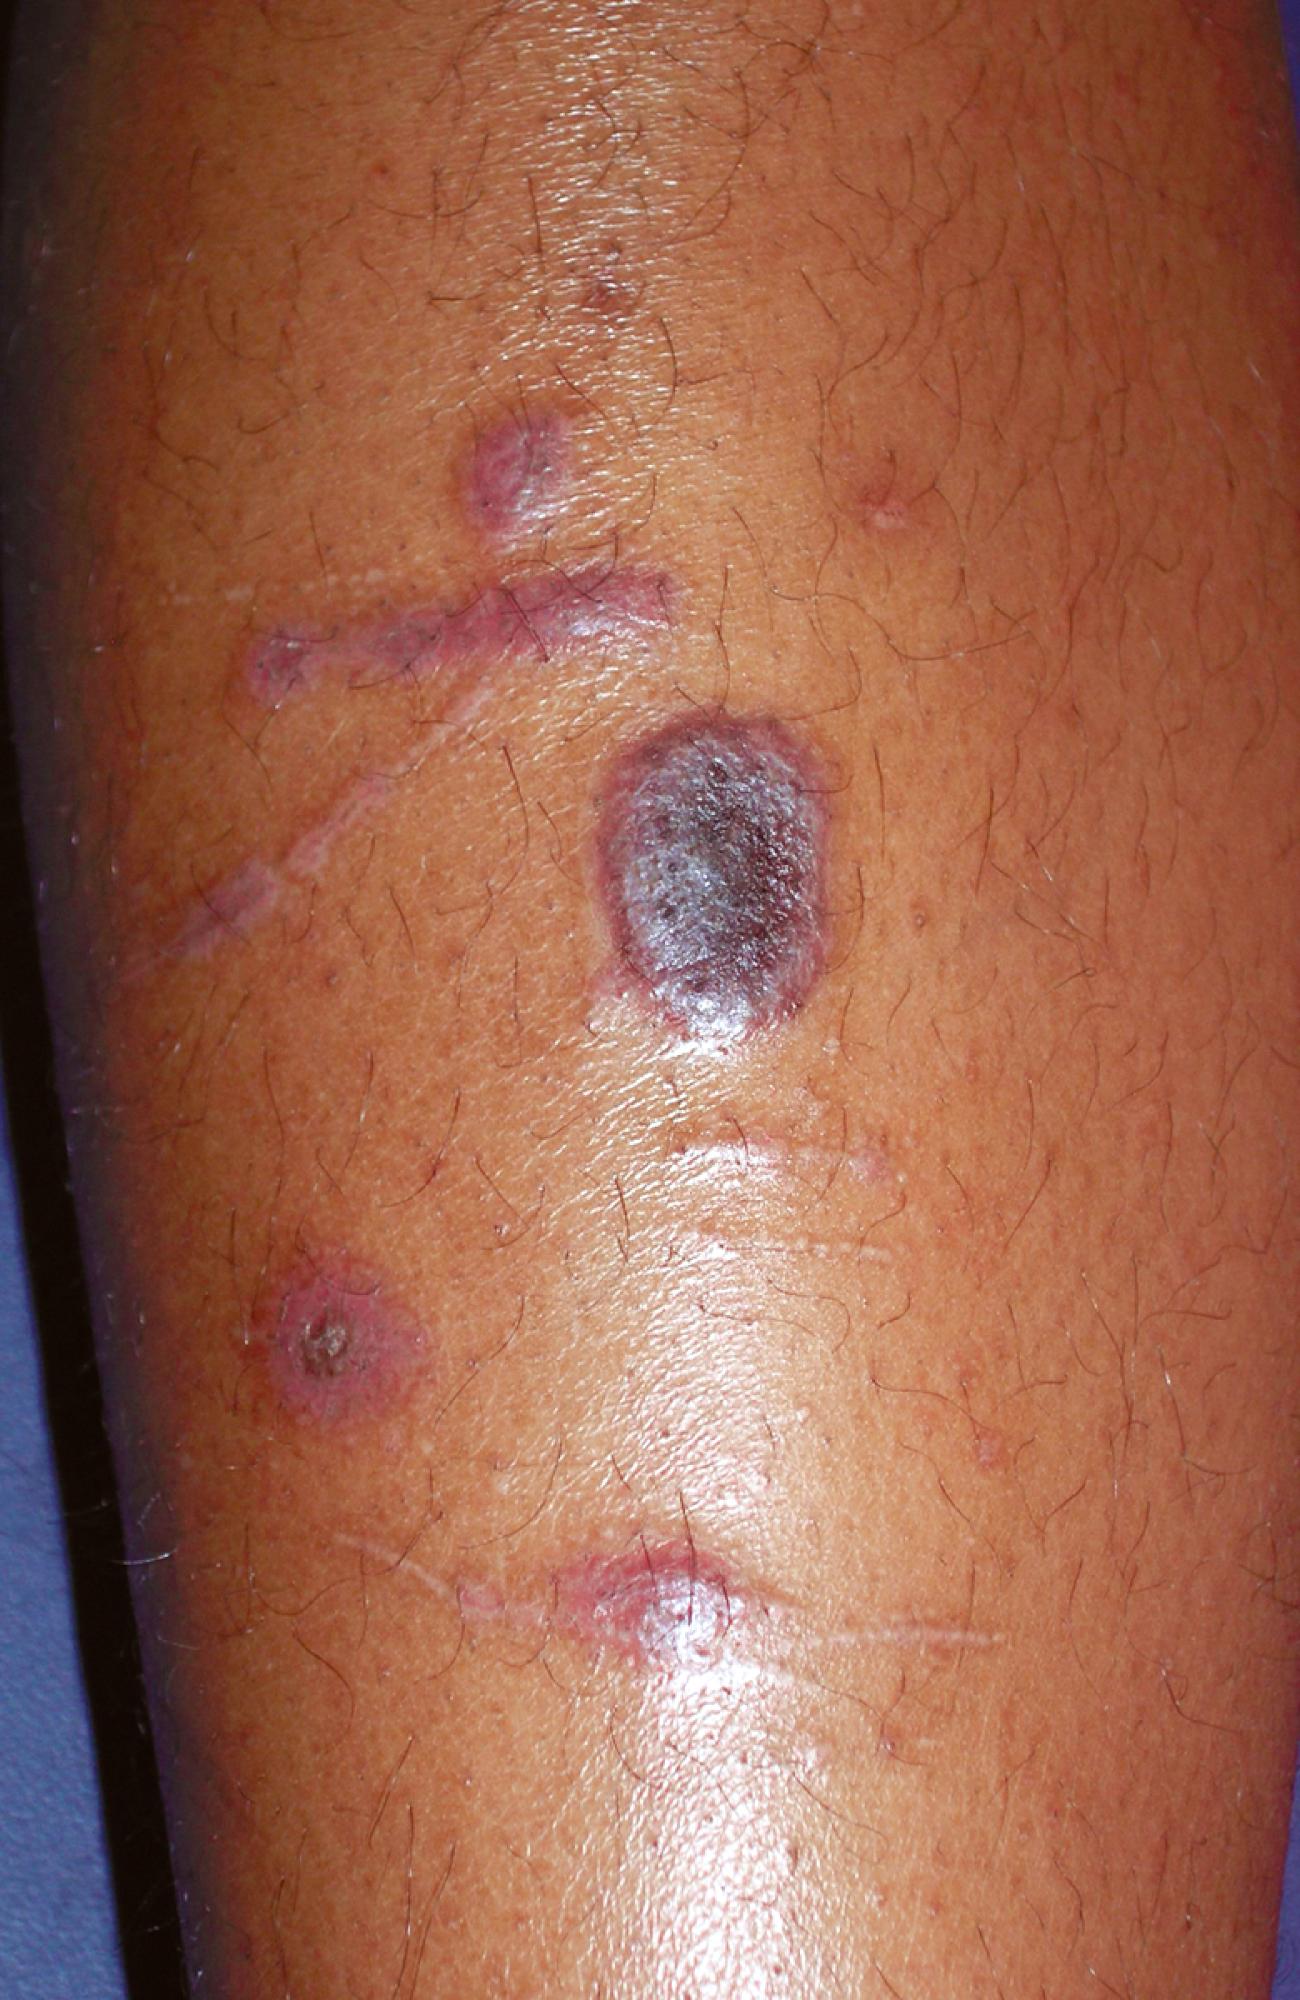 Fig. 8.49, Lichen planus. These flat-topped violaceous papules of varying sizes and shapes overlying the anterior shin are typical. Note the linear lesions that formed after scratching, examples of the Koebner phenomenon.